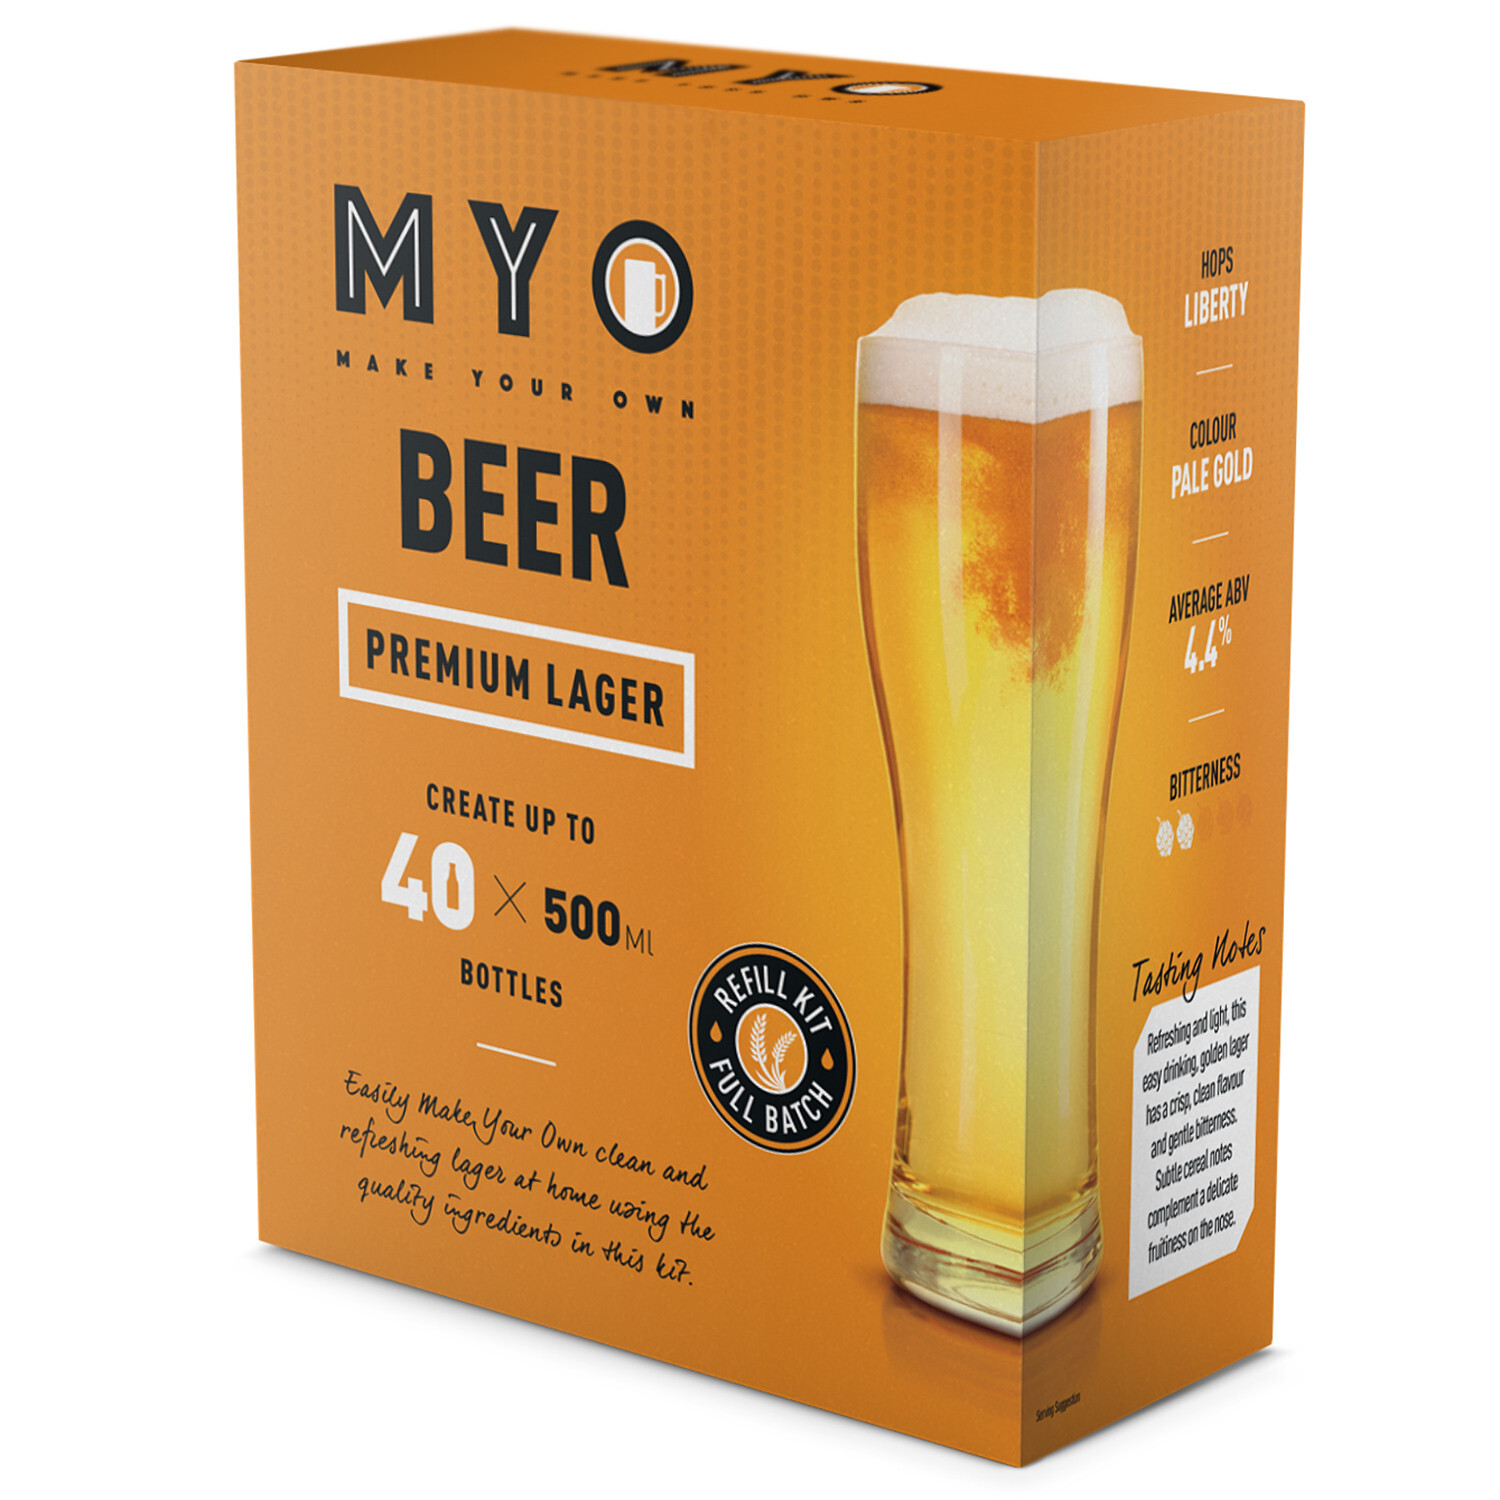 Make Your Own Beer Premium Lager Image